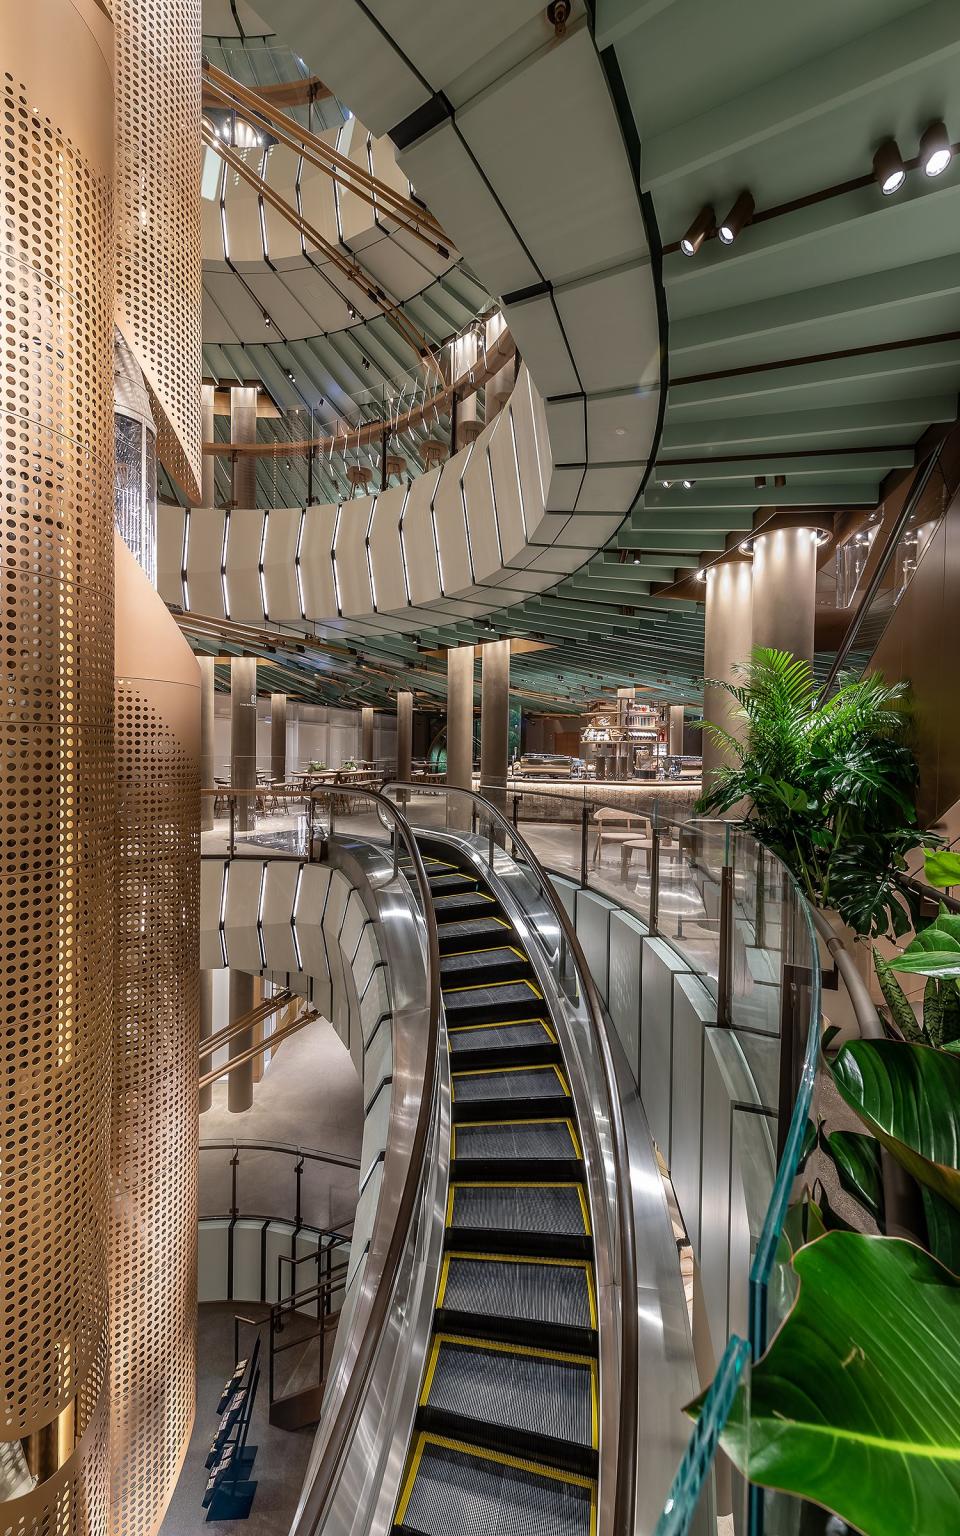 To get from the first to second floors, hop on the Midwest's first spiral escalator, which circles the cask. The layout of the store was inspired in part by the former Crate & Barrel; Starbucks designers kept the original facade of the historic building, using its natural light and Scandinavian tinge for the tan and green shades throughout the space.